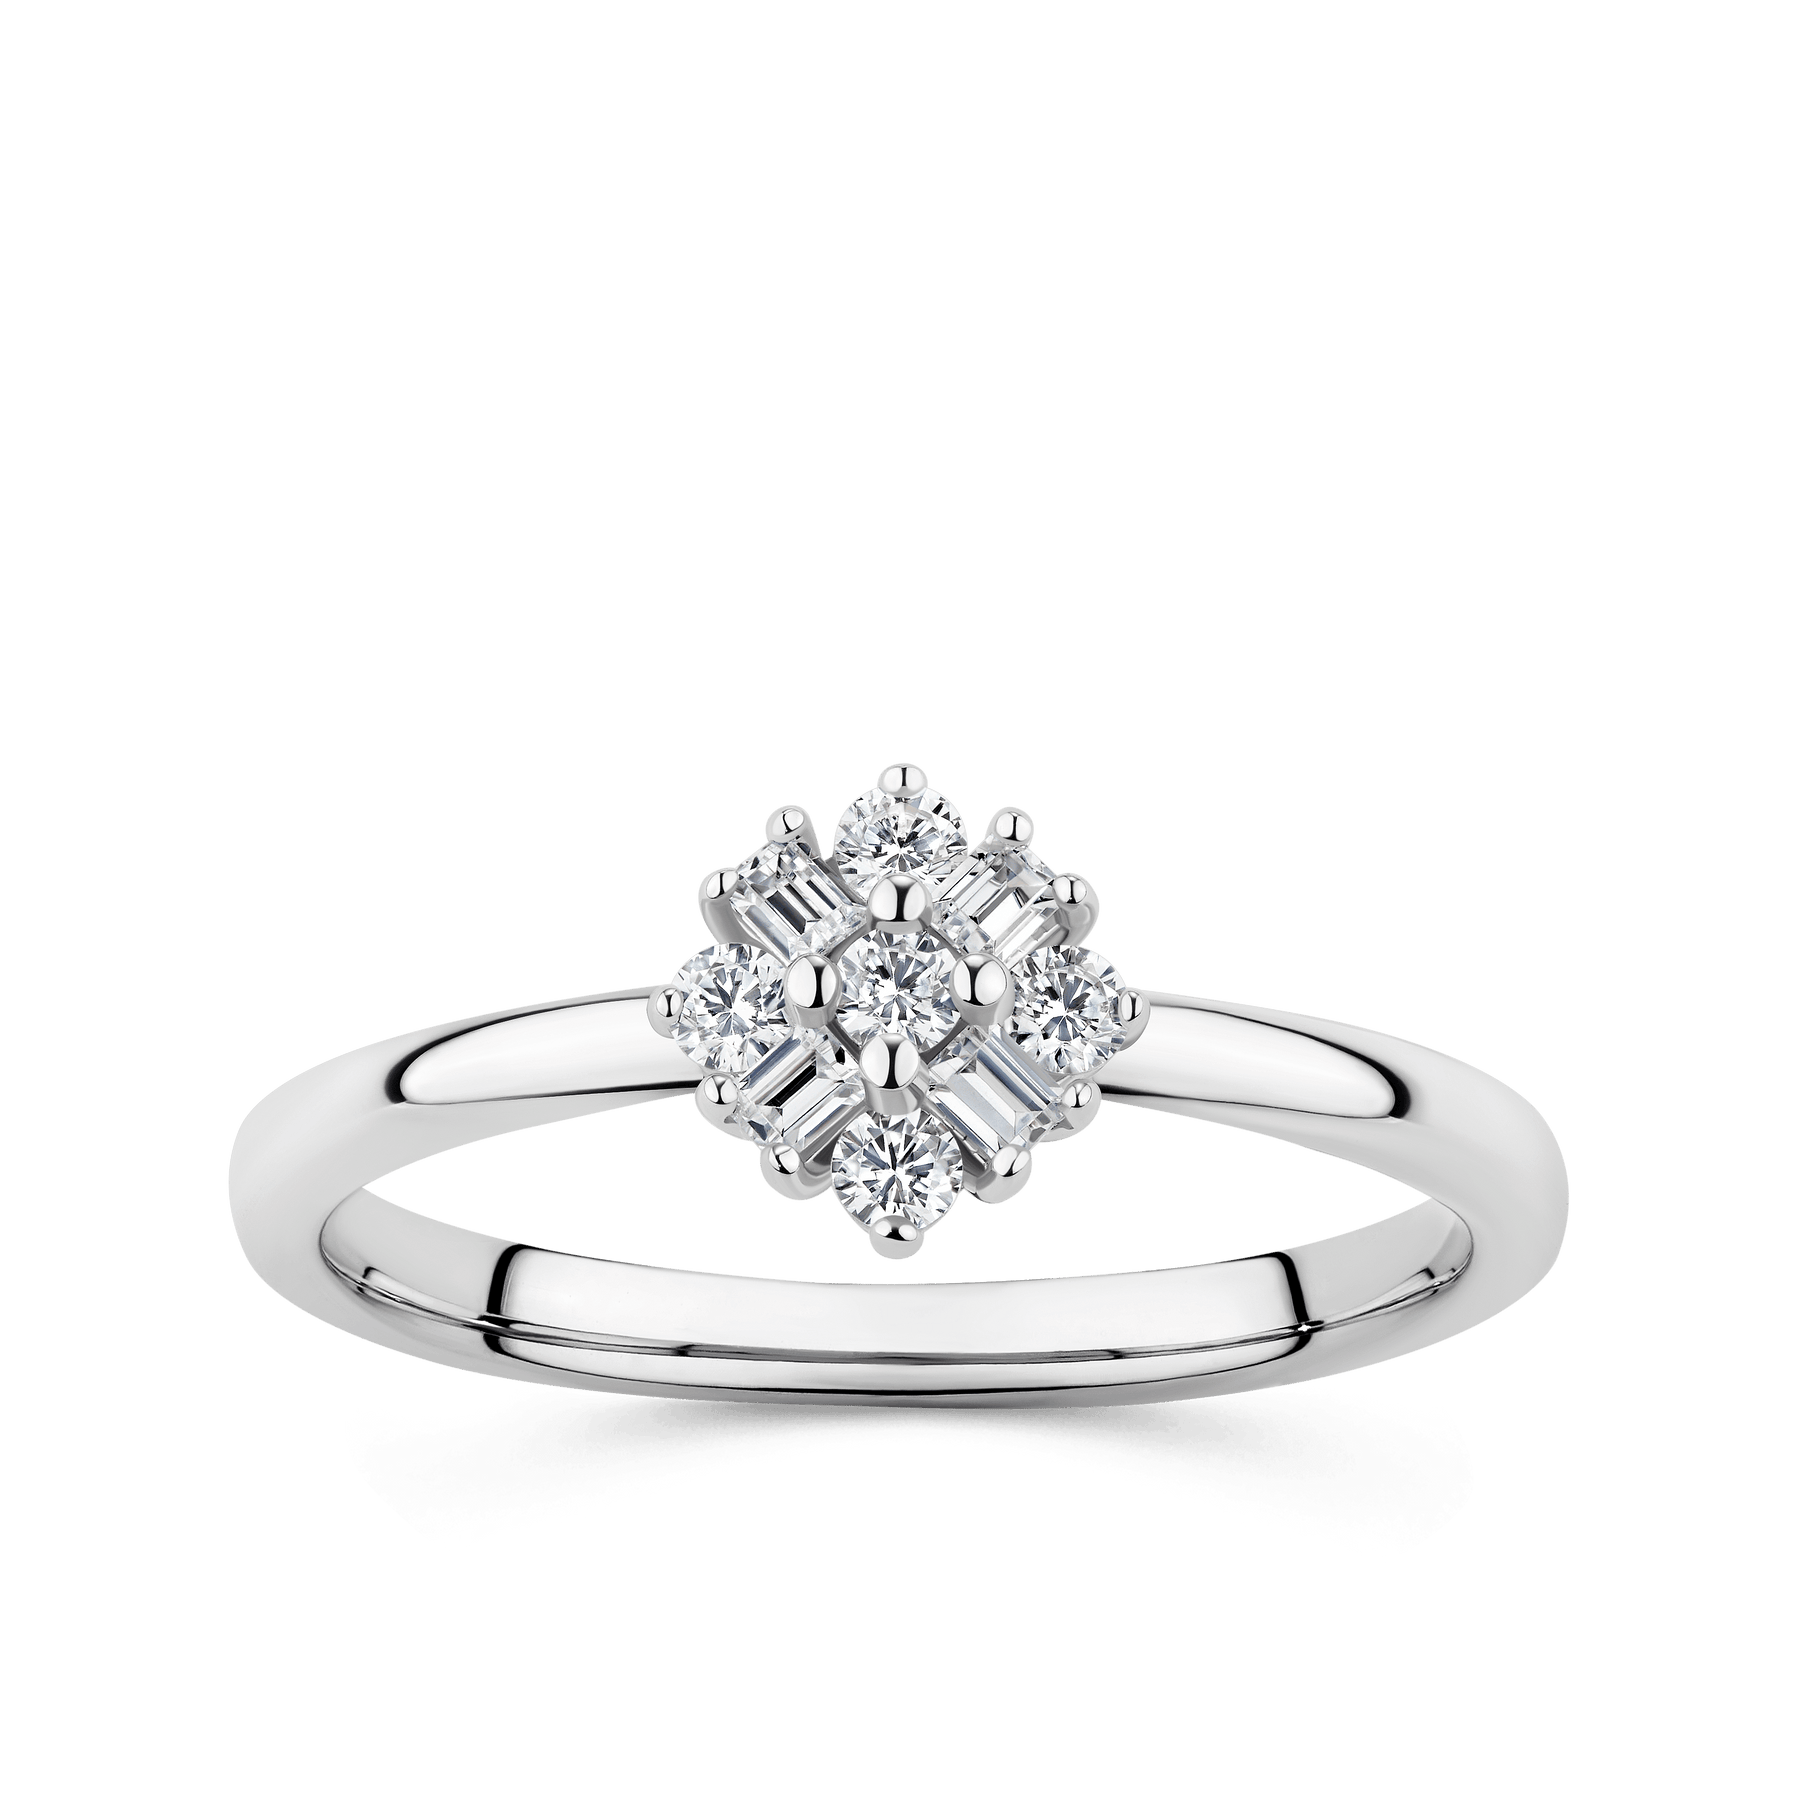 Cubic Zirconia Cluster Ring in Sterling Silver - Wallace Bishop